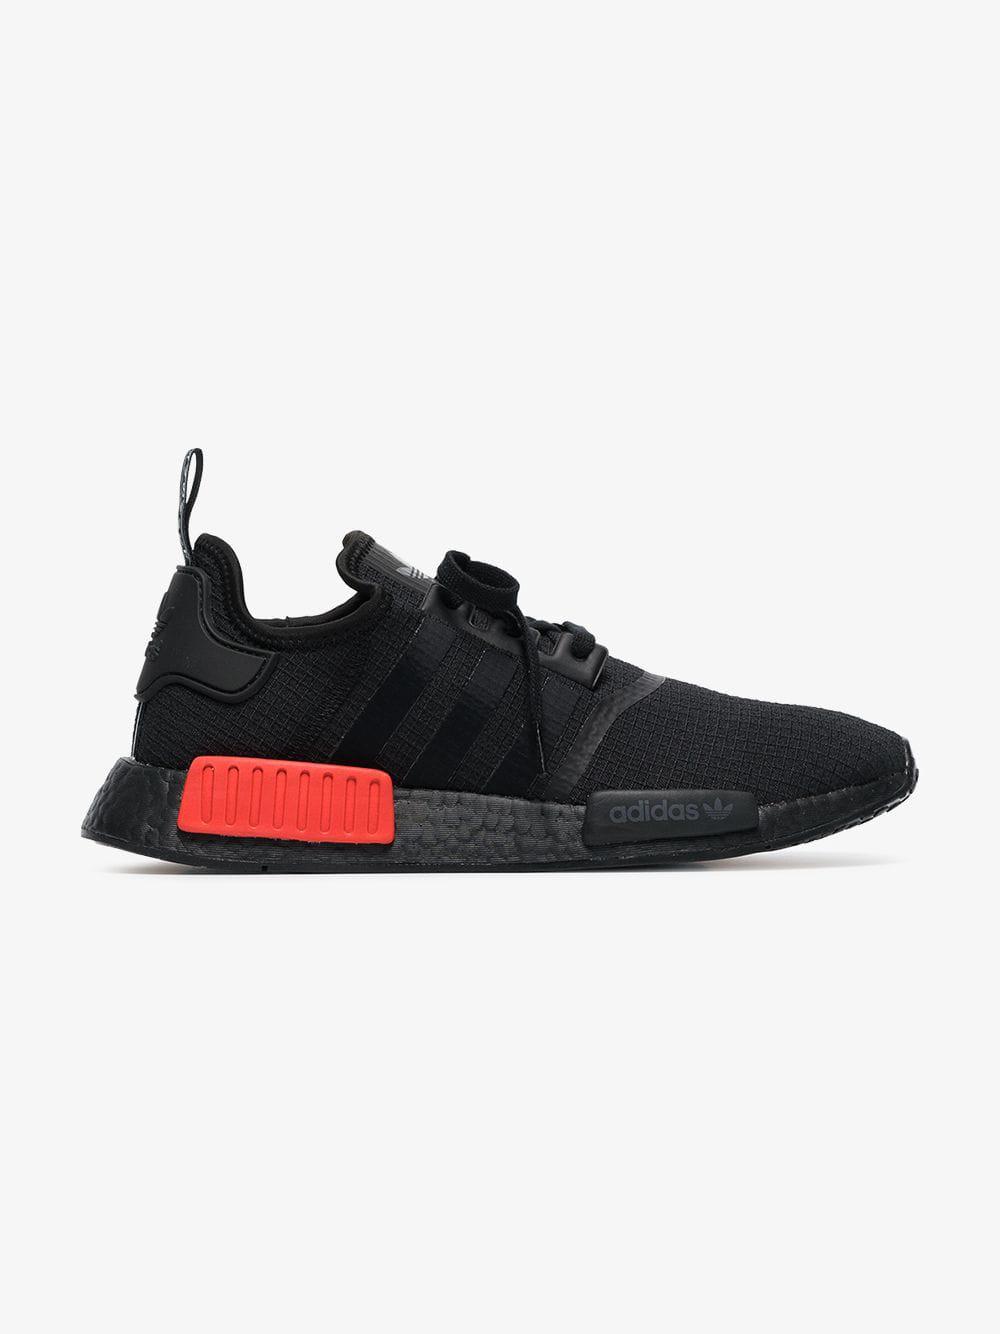 adidas Synthetic Black And Red Nmd R1 for Men - Lyst